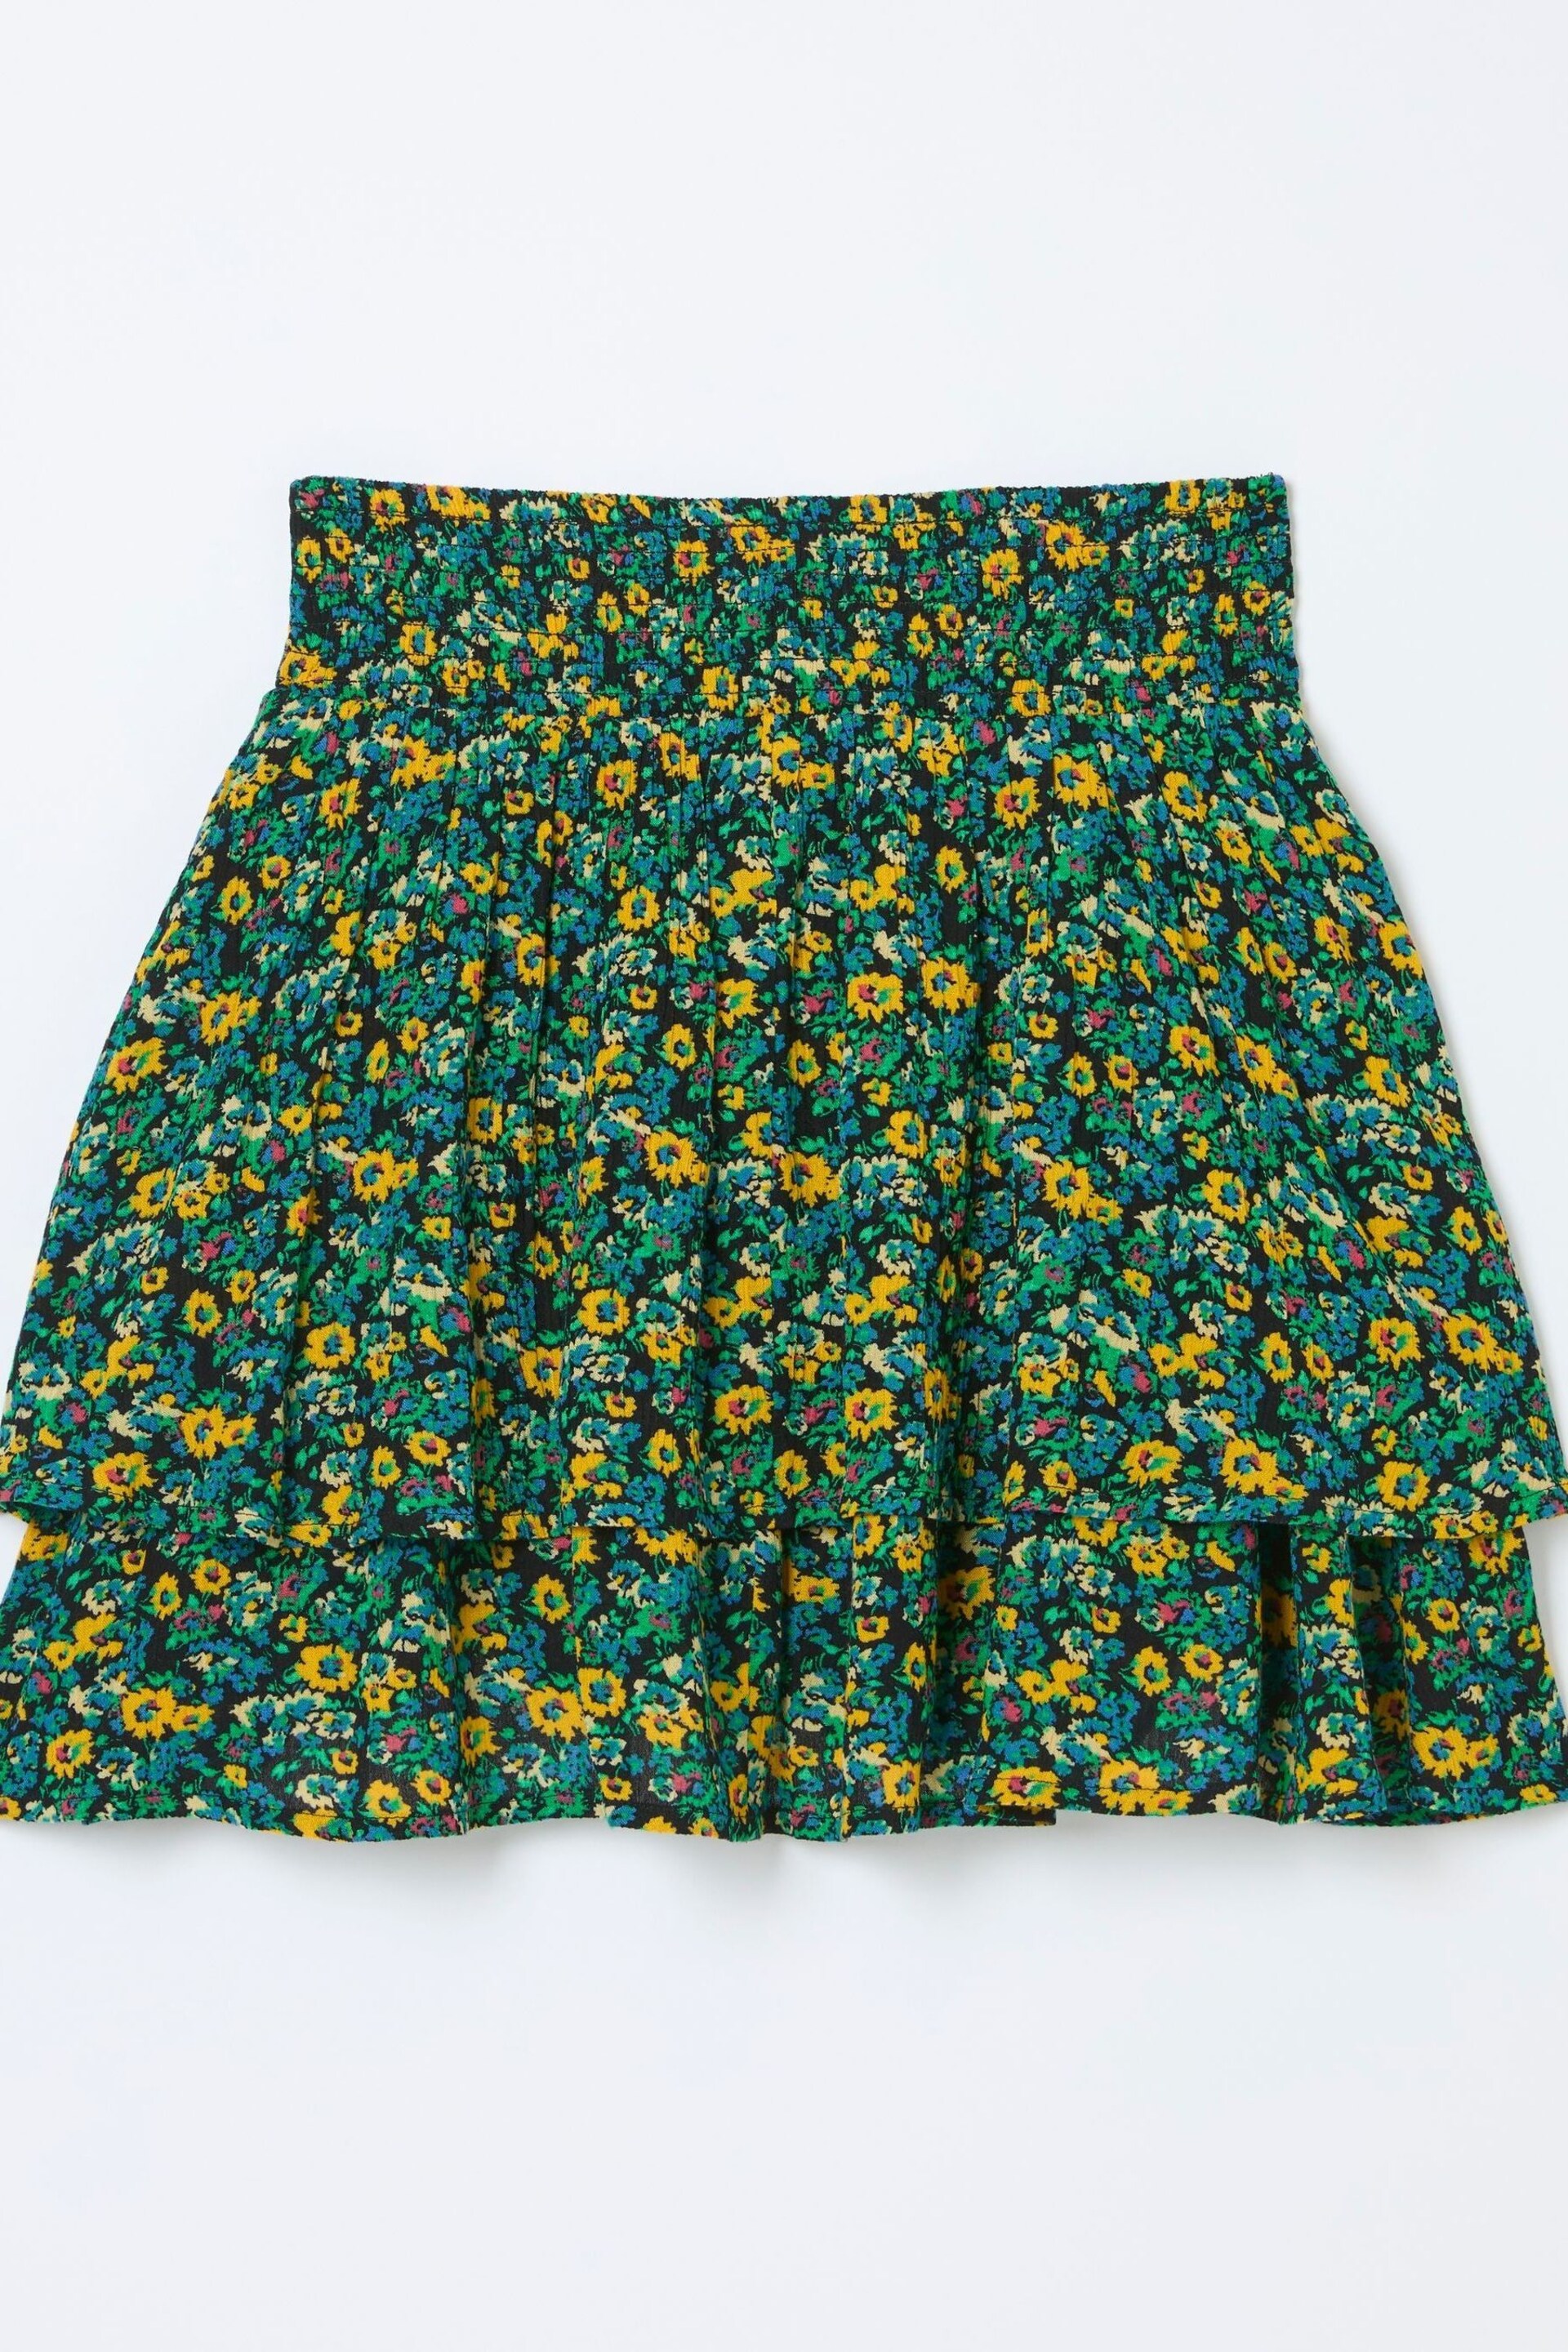 FatFace Green Spring Floral Skirt - Image 5 of 5